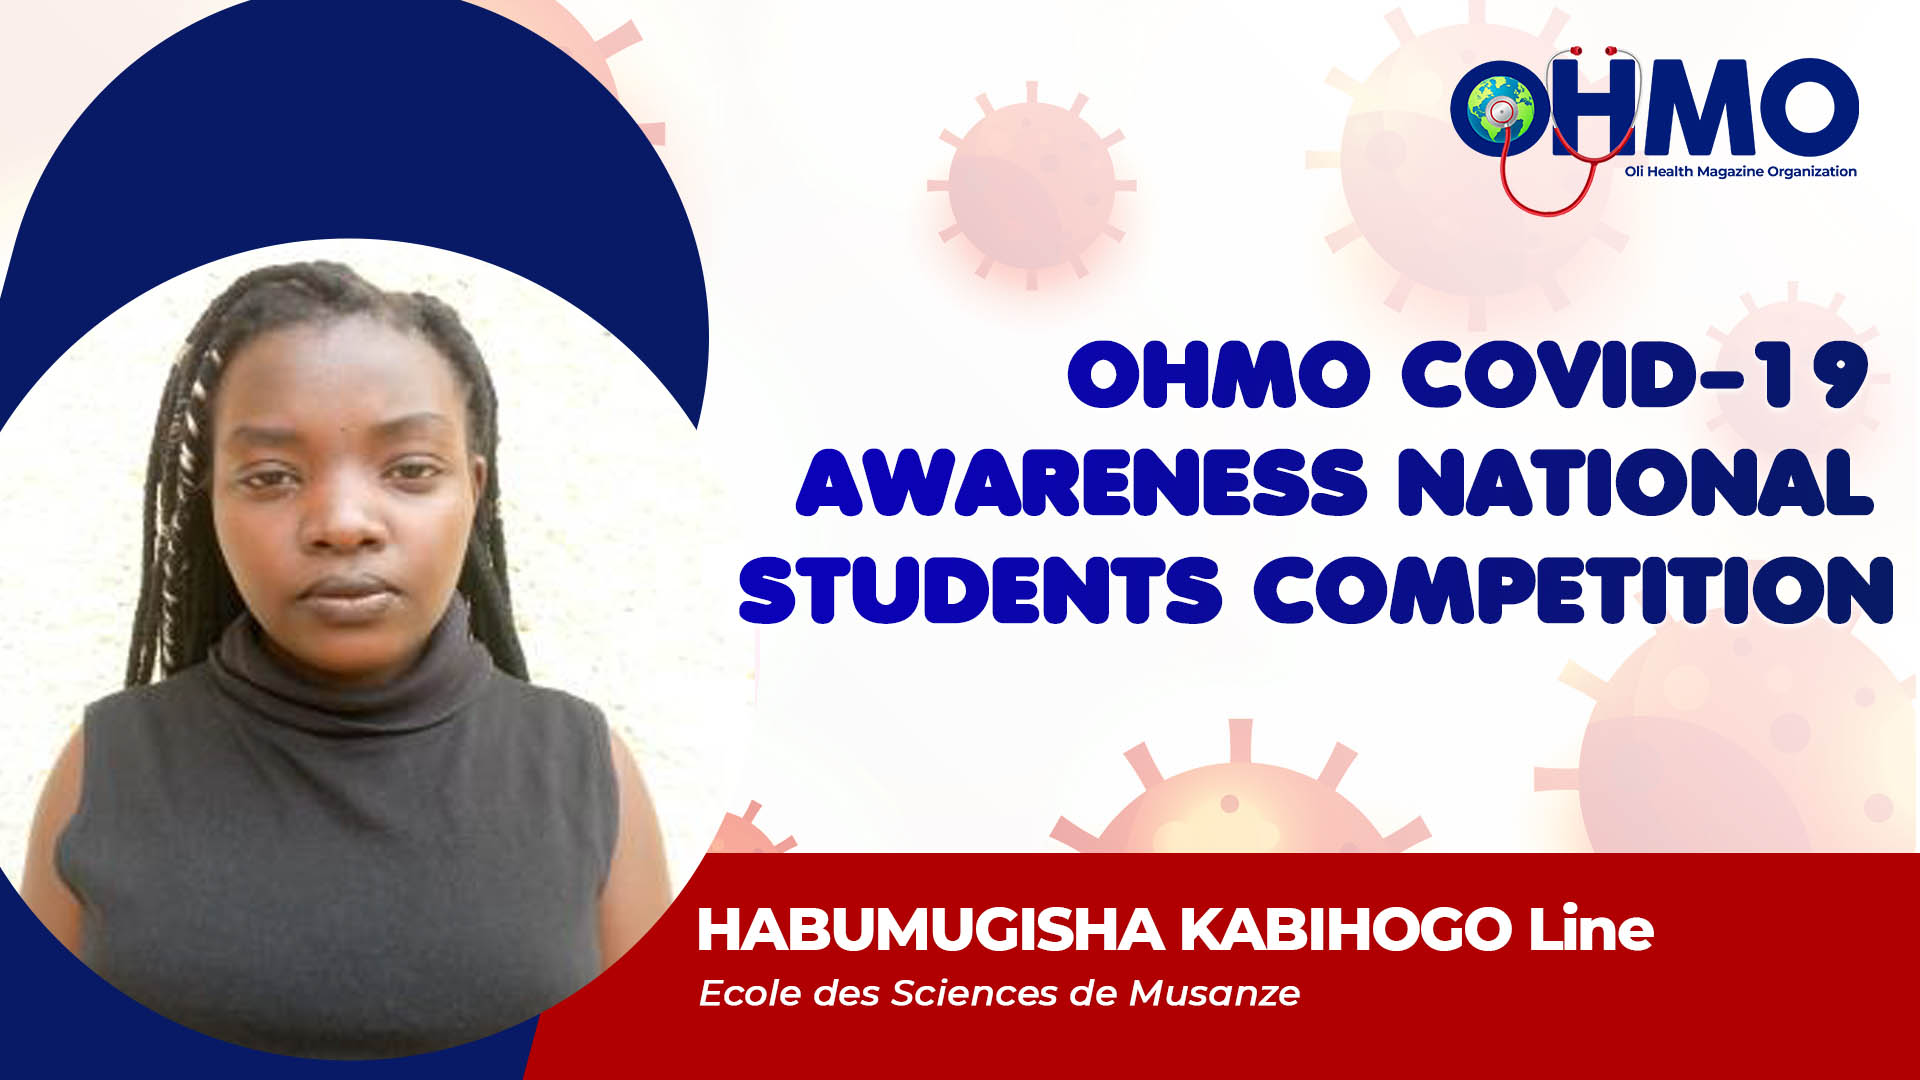 Impact Of COVID19 On Mental Health And How To Cope With It - HABUMUGISHA KABIHOGO Line from Ecole des Sciences de Musanze (ENTRY 49)